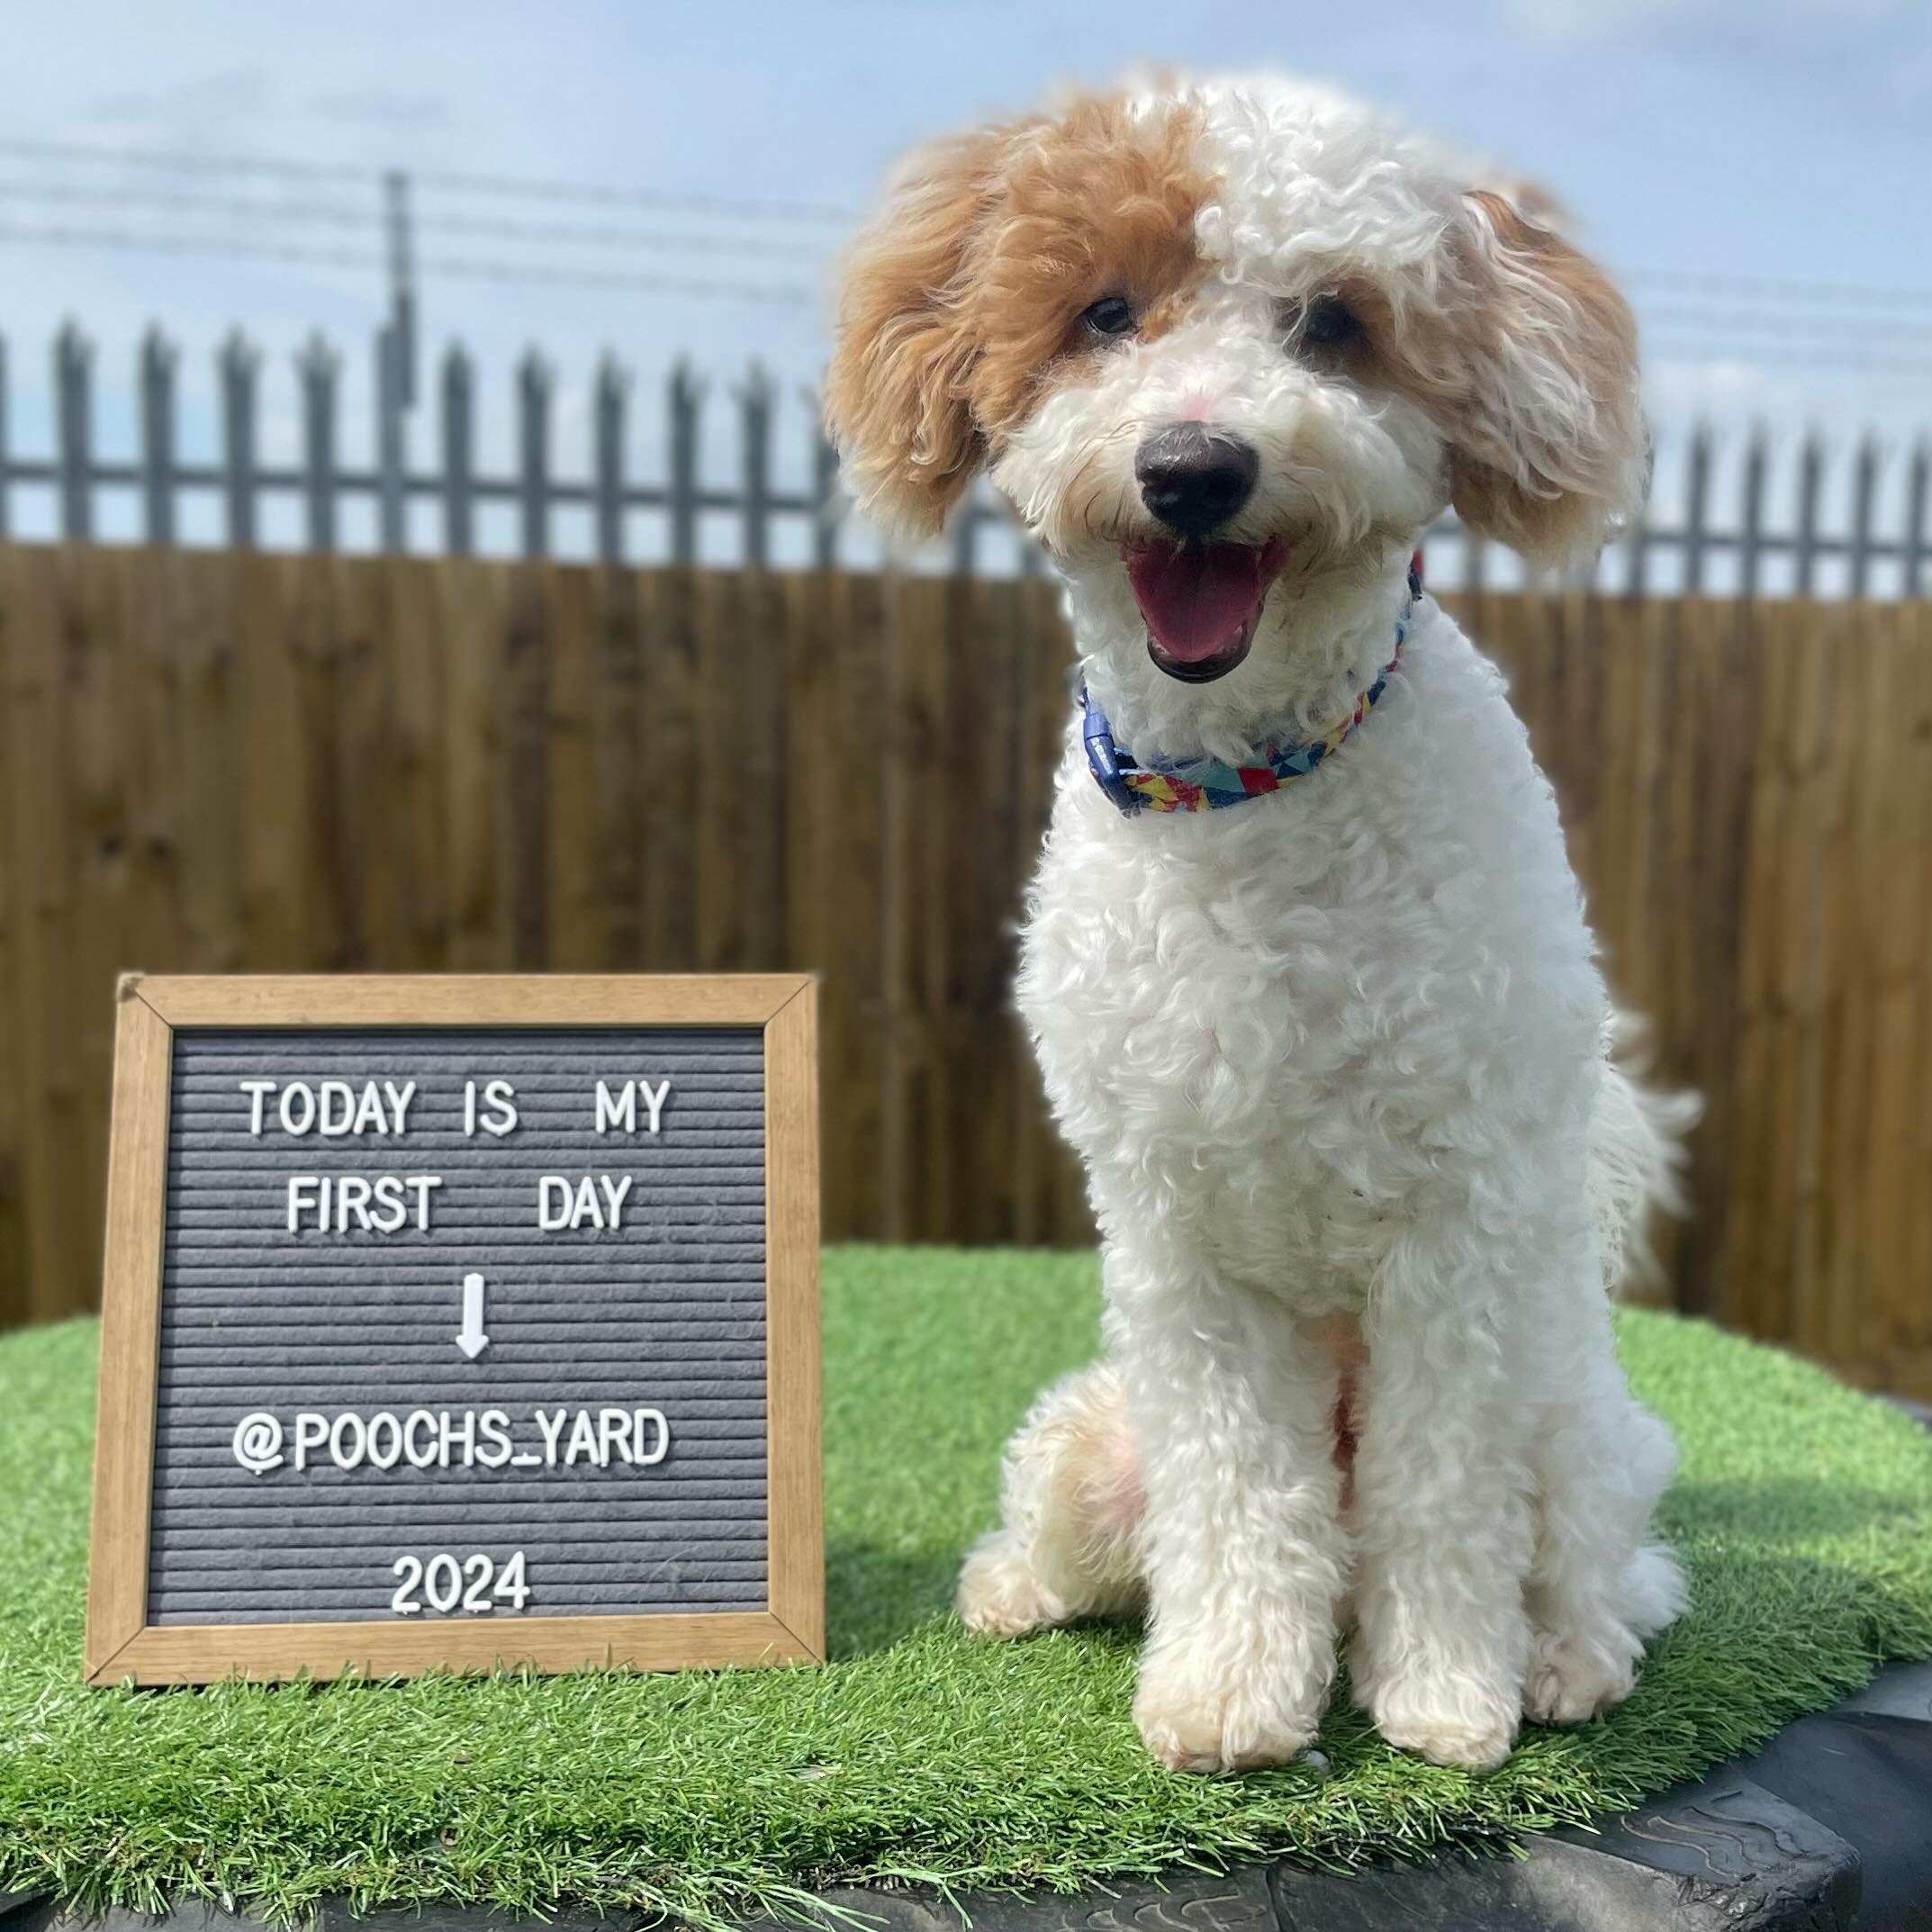 Do we have a treat for you today!!! 
&mdash;
Everyone meet Buddy, Buddy has come along for his first day with us here at Pooch&rsquo;s Yard and he is living his best life, Buddy is loving rough playing and tumbling around with Daisy, Winnie &amp; Het